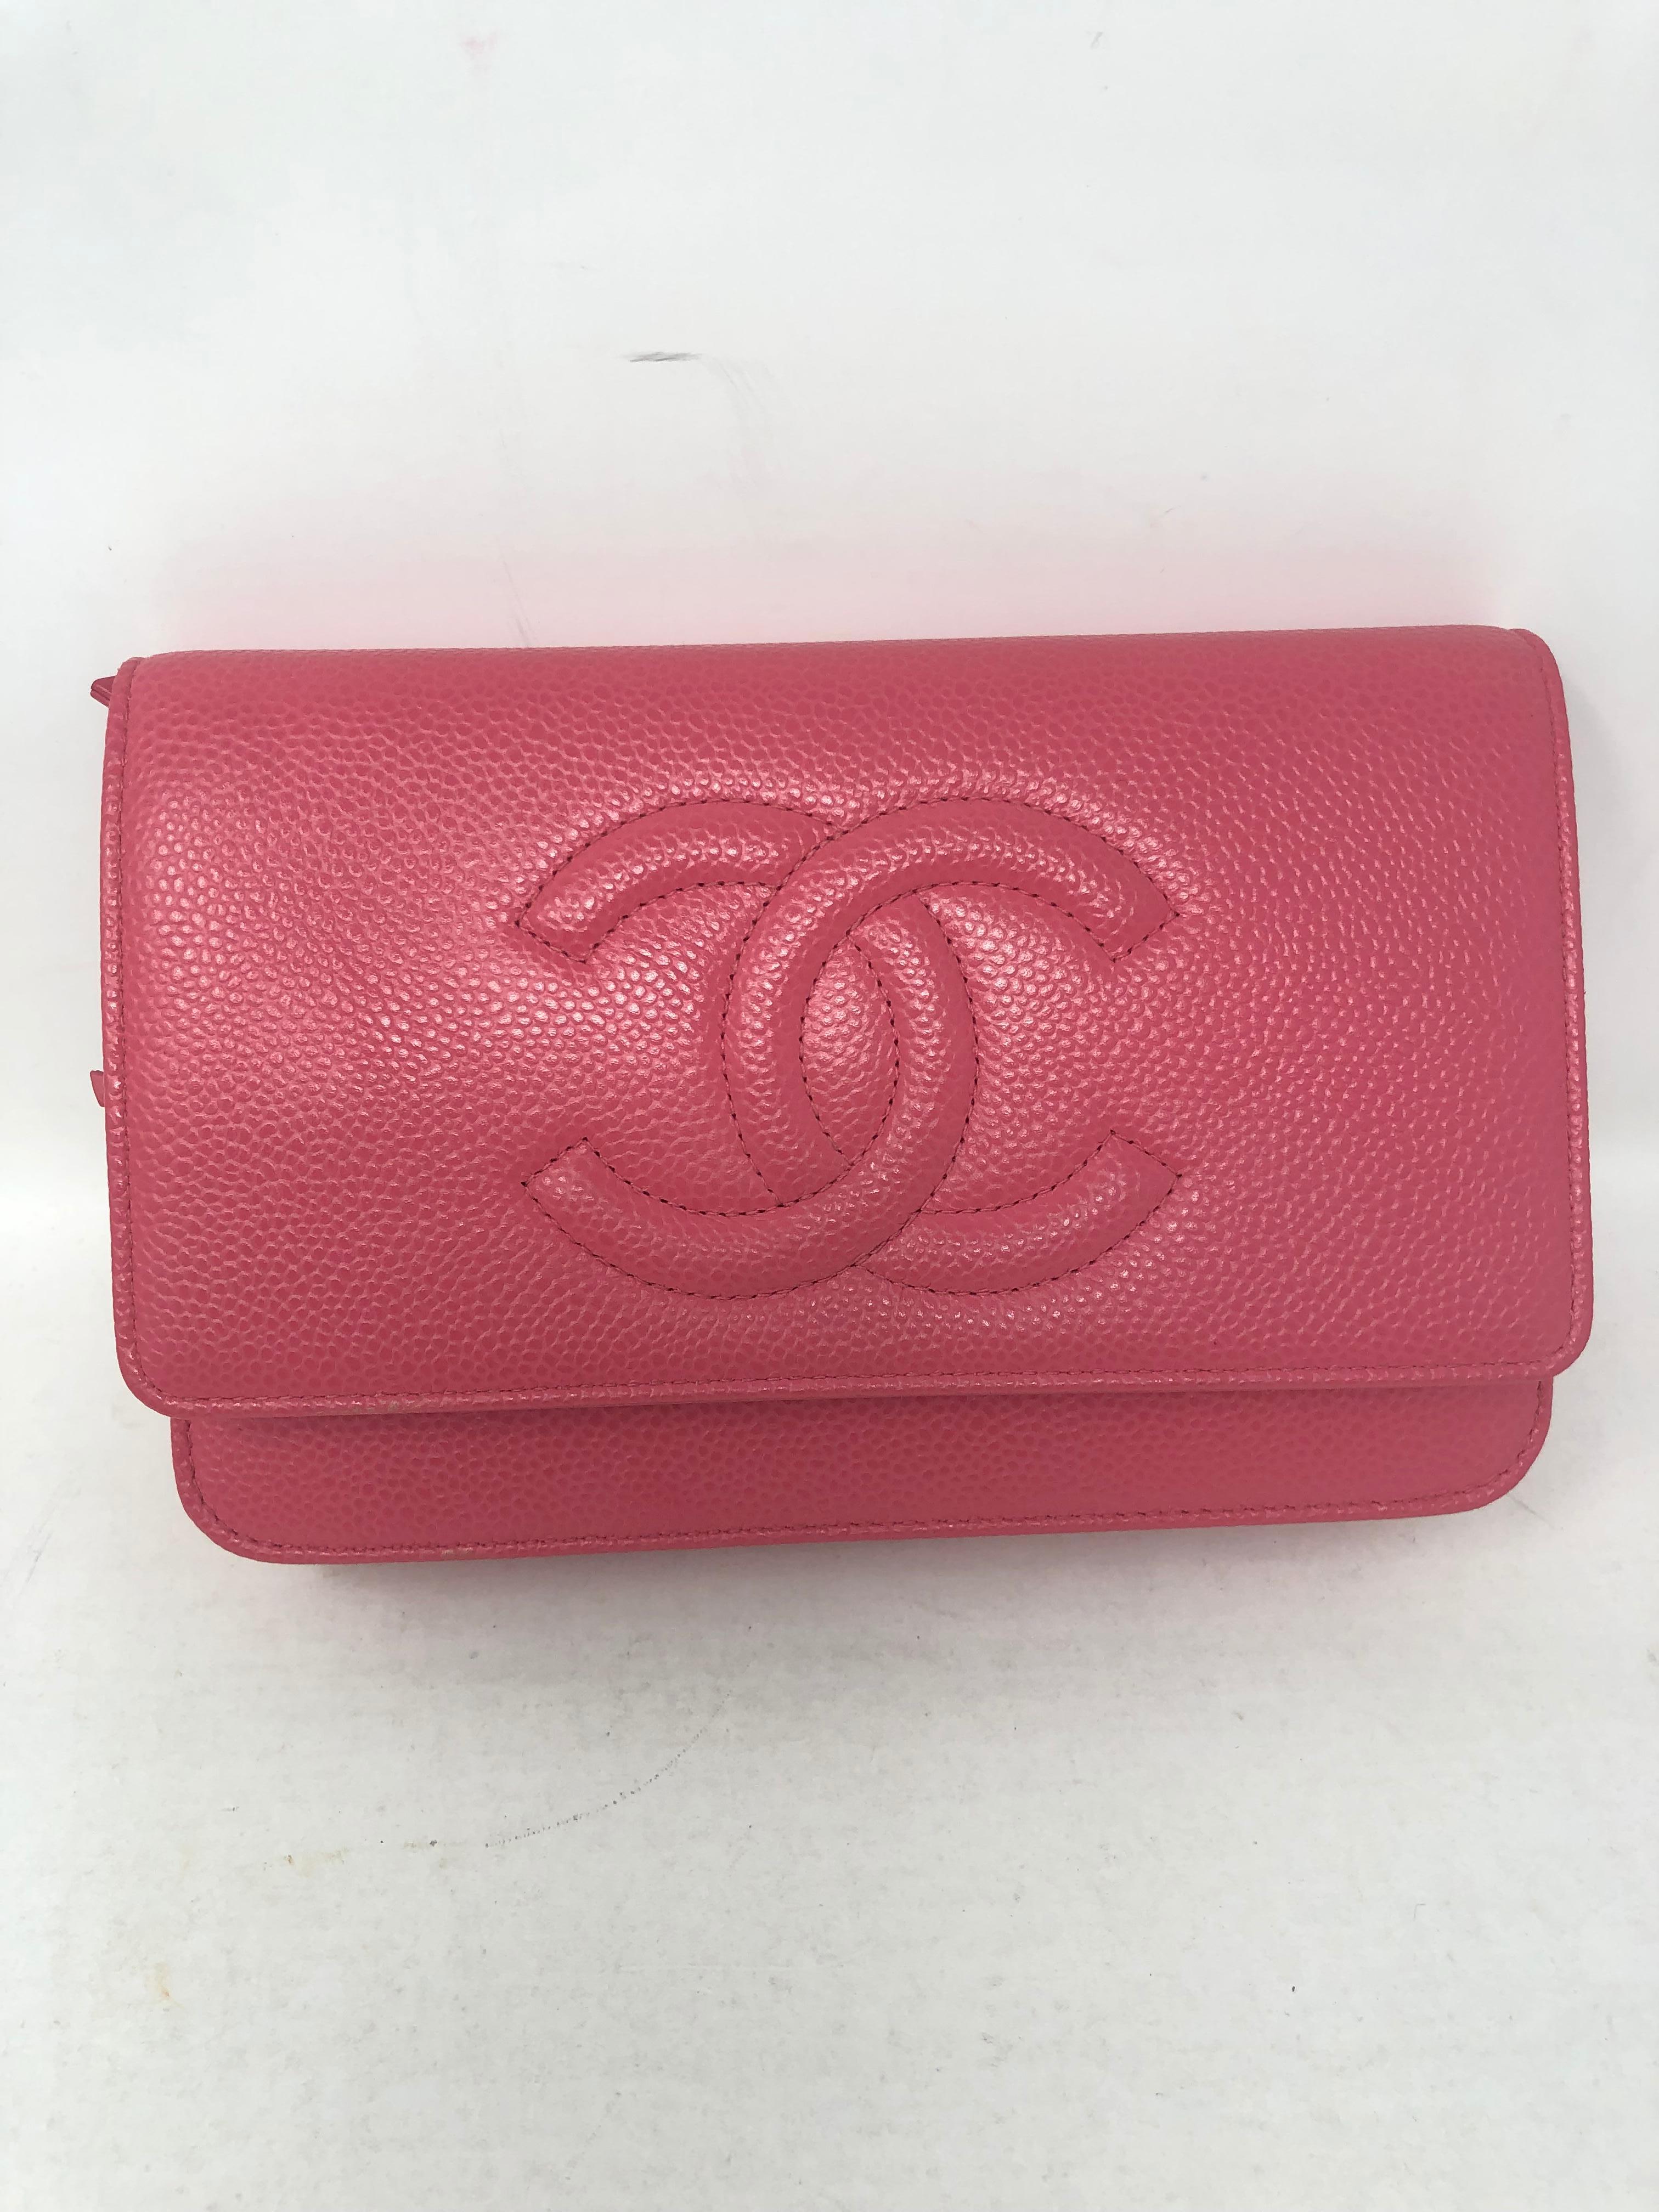 Chanel Pink Caviar Leather Wallet On A Chain. Silver hardware. Excellent condition. Hard to find WOC. Can be worn as a clutch or as a crossbody bag. Includes authenticity card and original booklet care. Guaranteed authentic. 